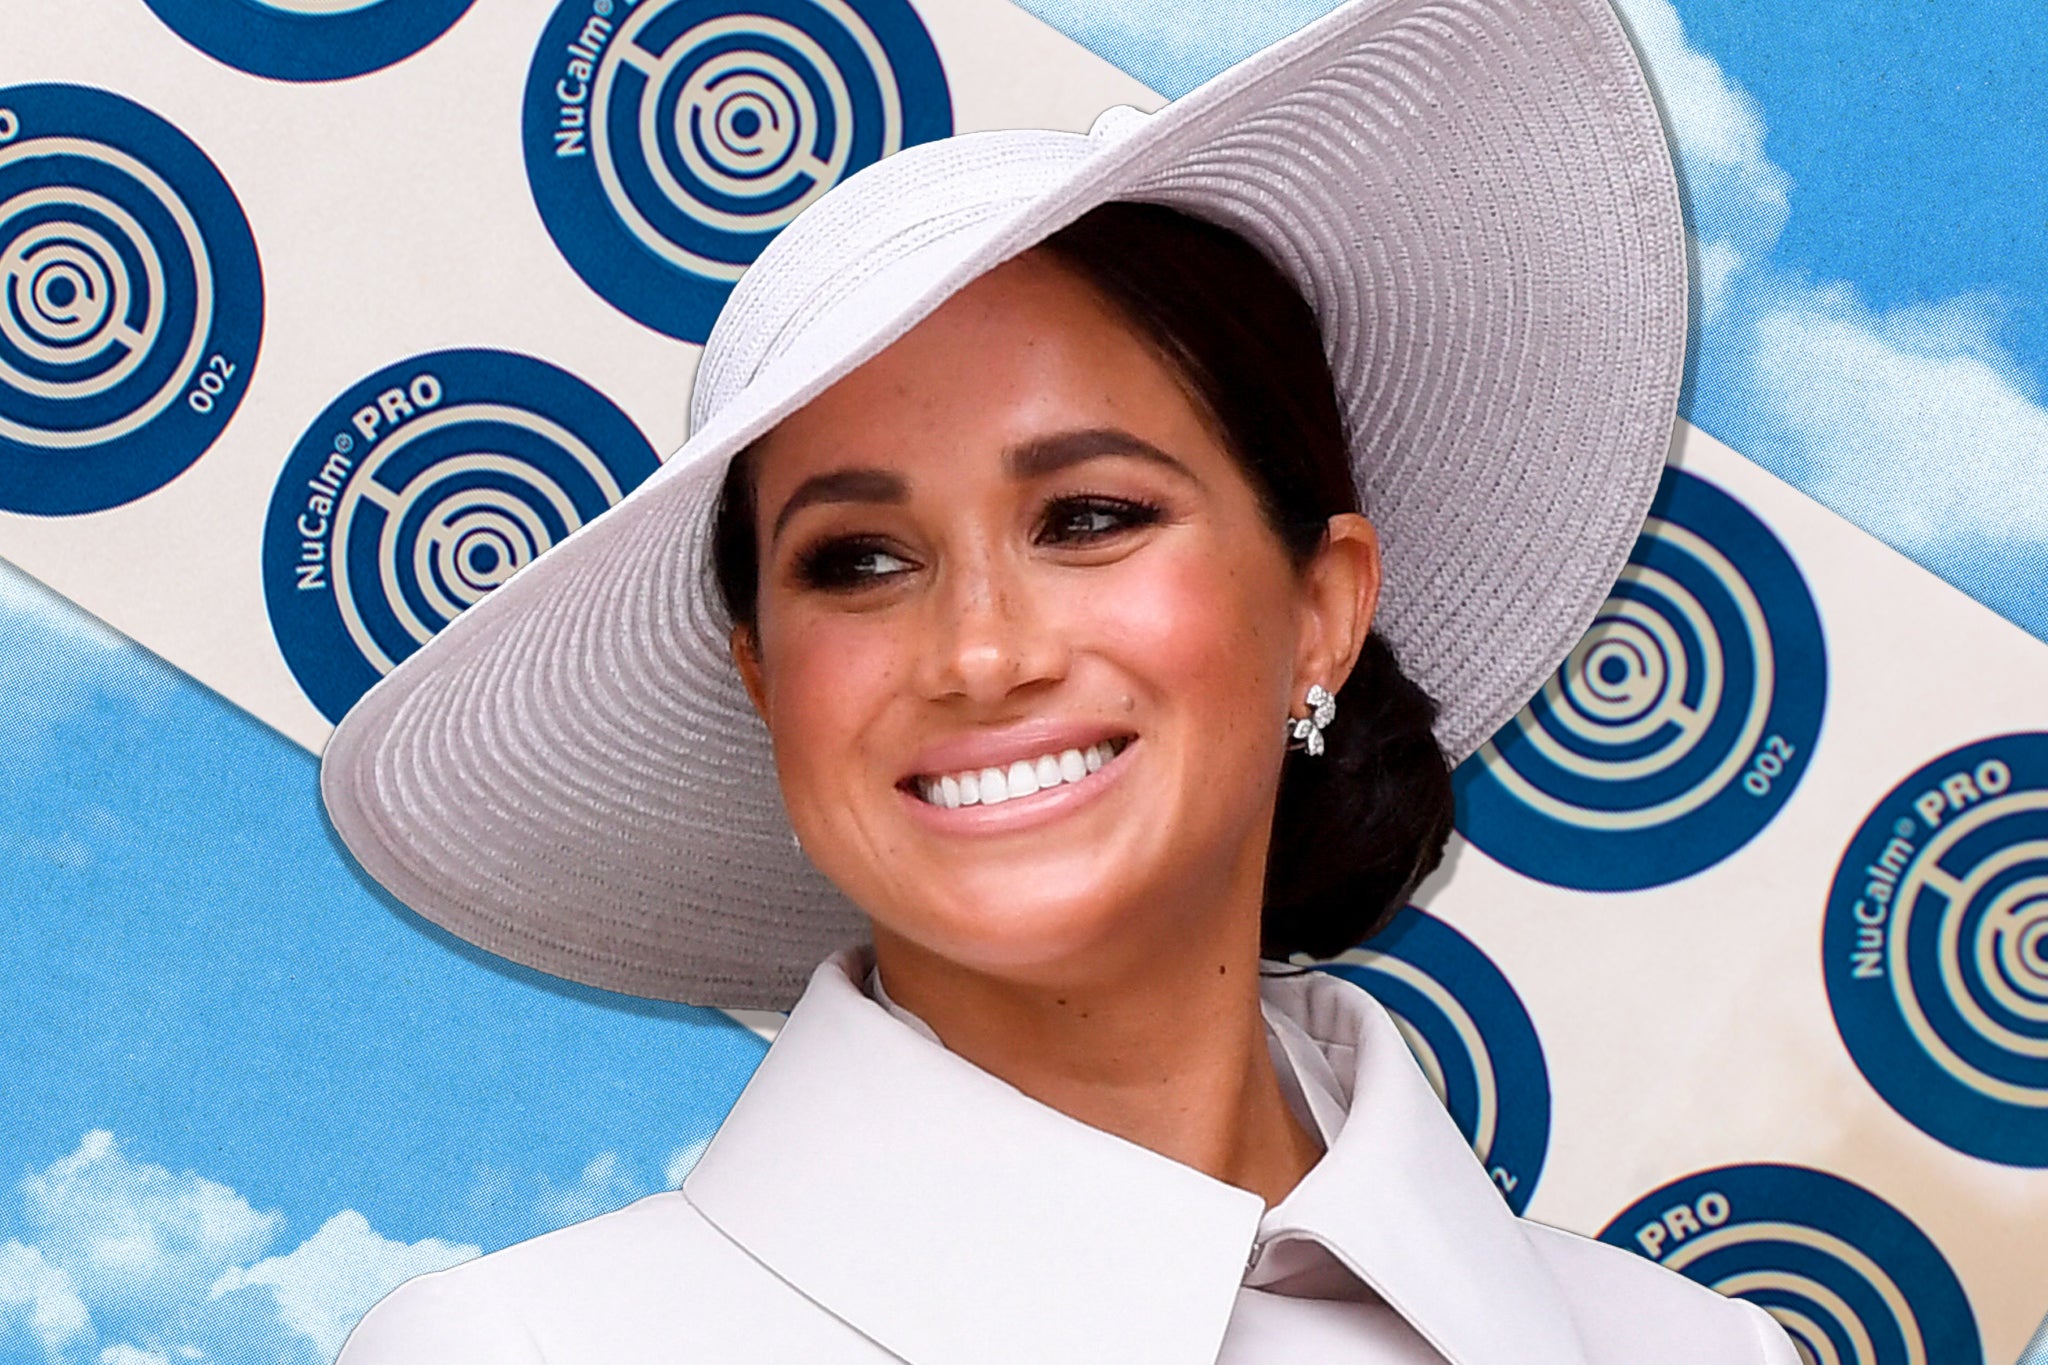 Meghan Markle, who has been spotted using products by NuCalm that purport to slow the beta frequencies of your brain